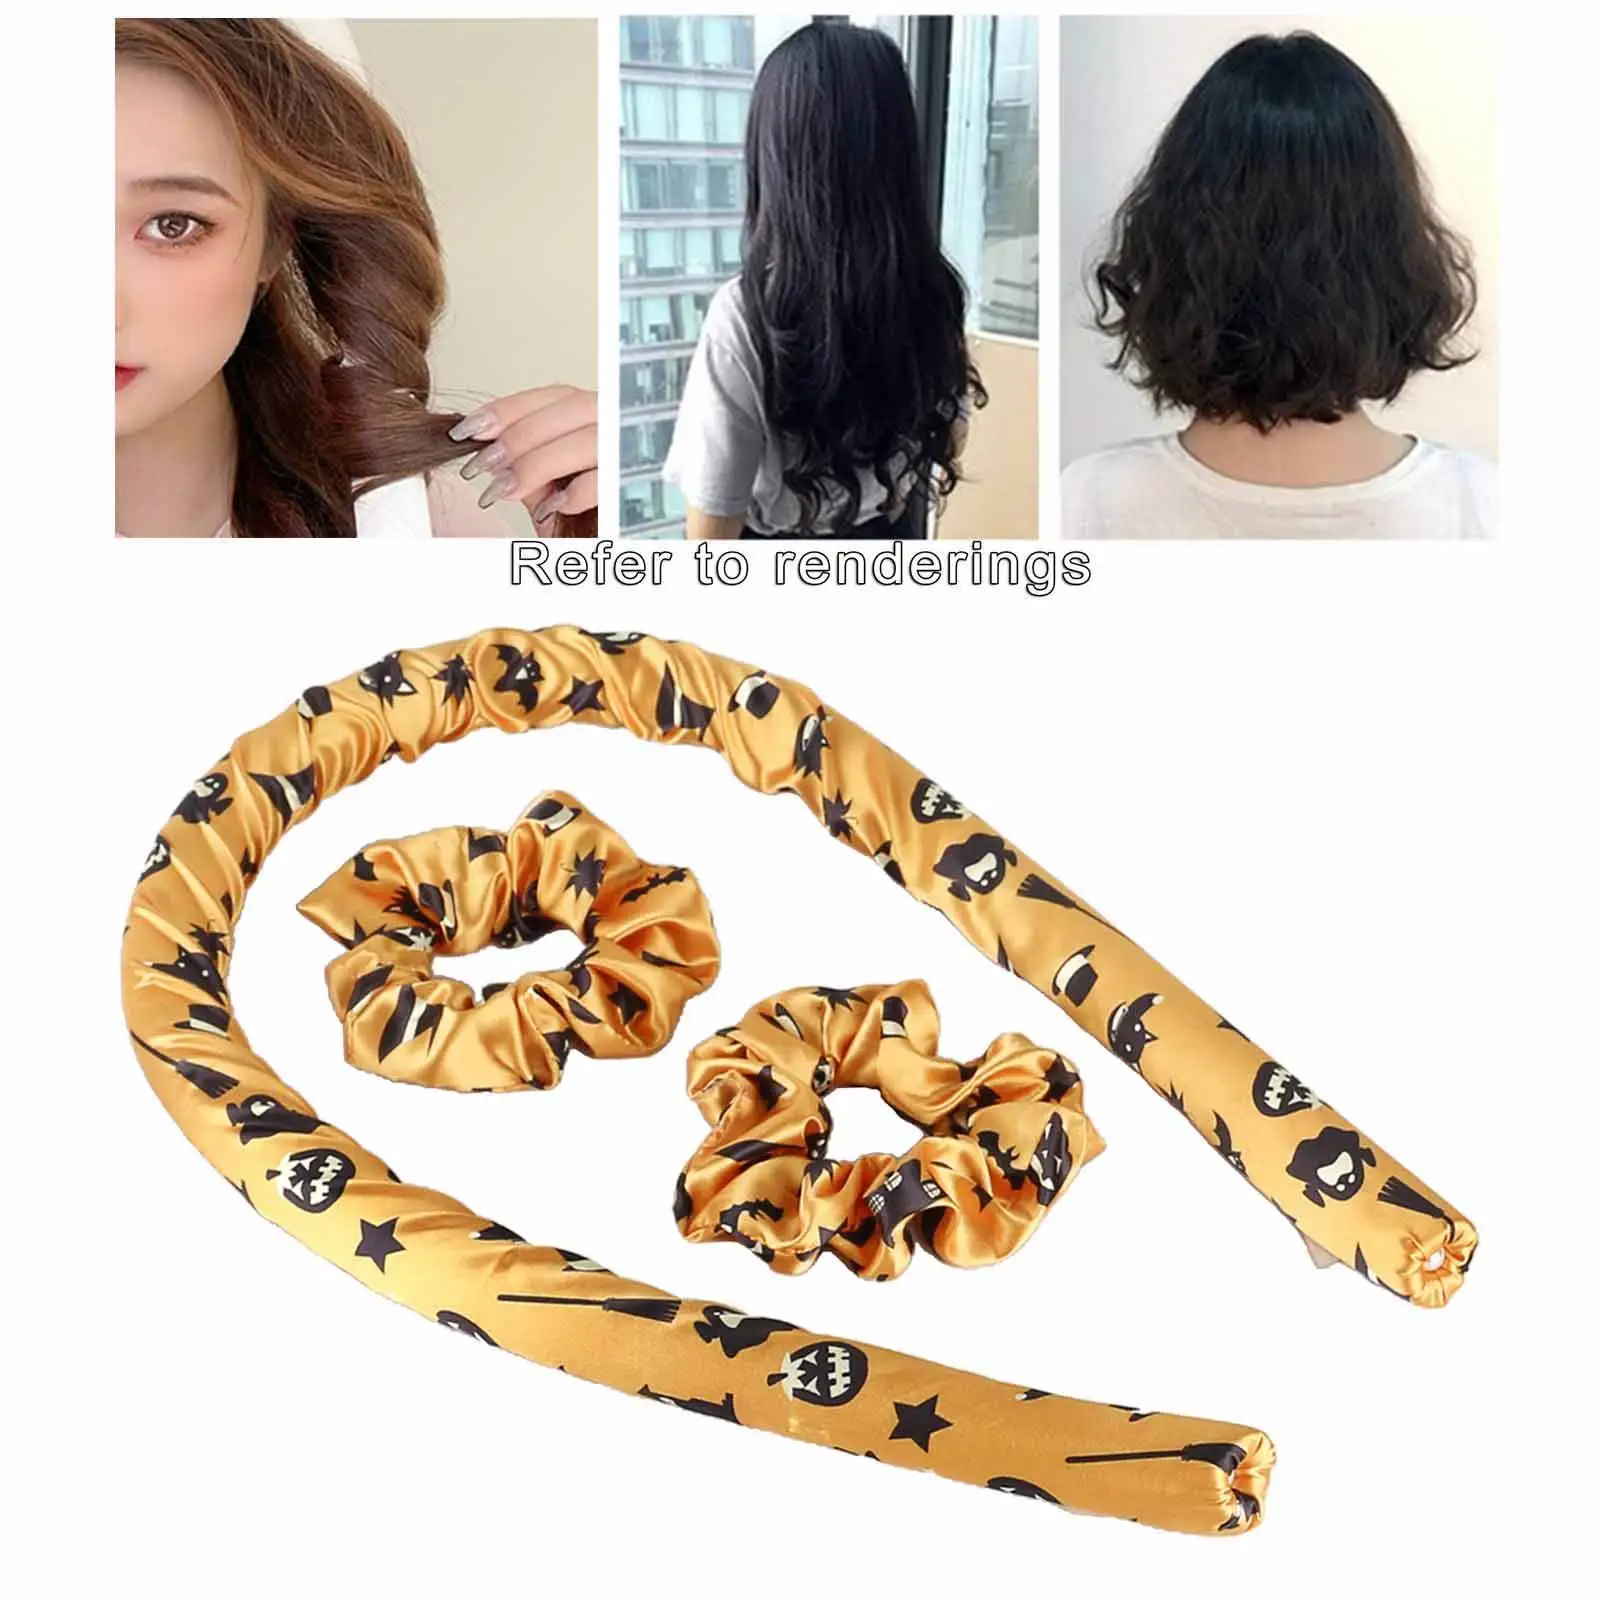 Curling Rod Sleeping DIY Hair Styling Tools No Heat with Clip Soft Foam Overnight Hair Rollers for Long Medium Hair Girls Women 